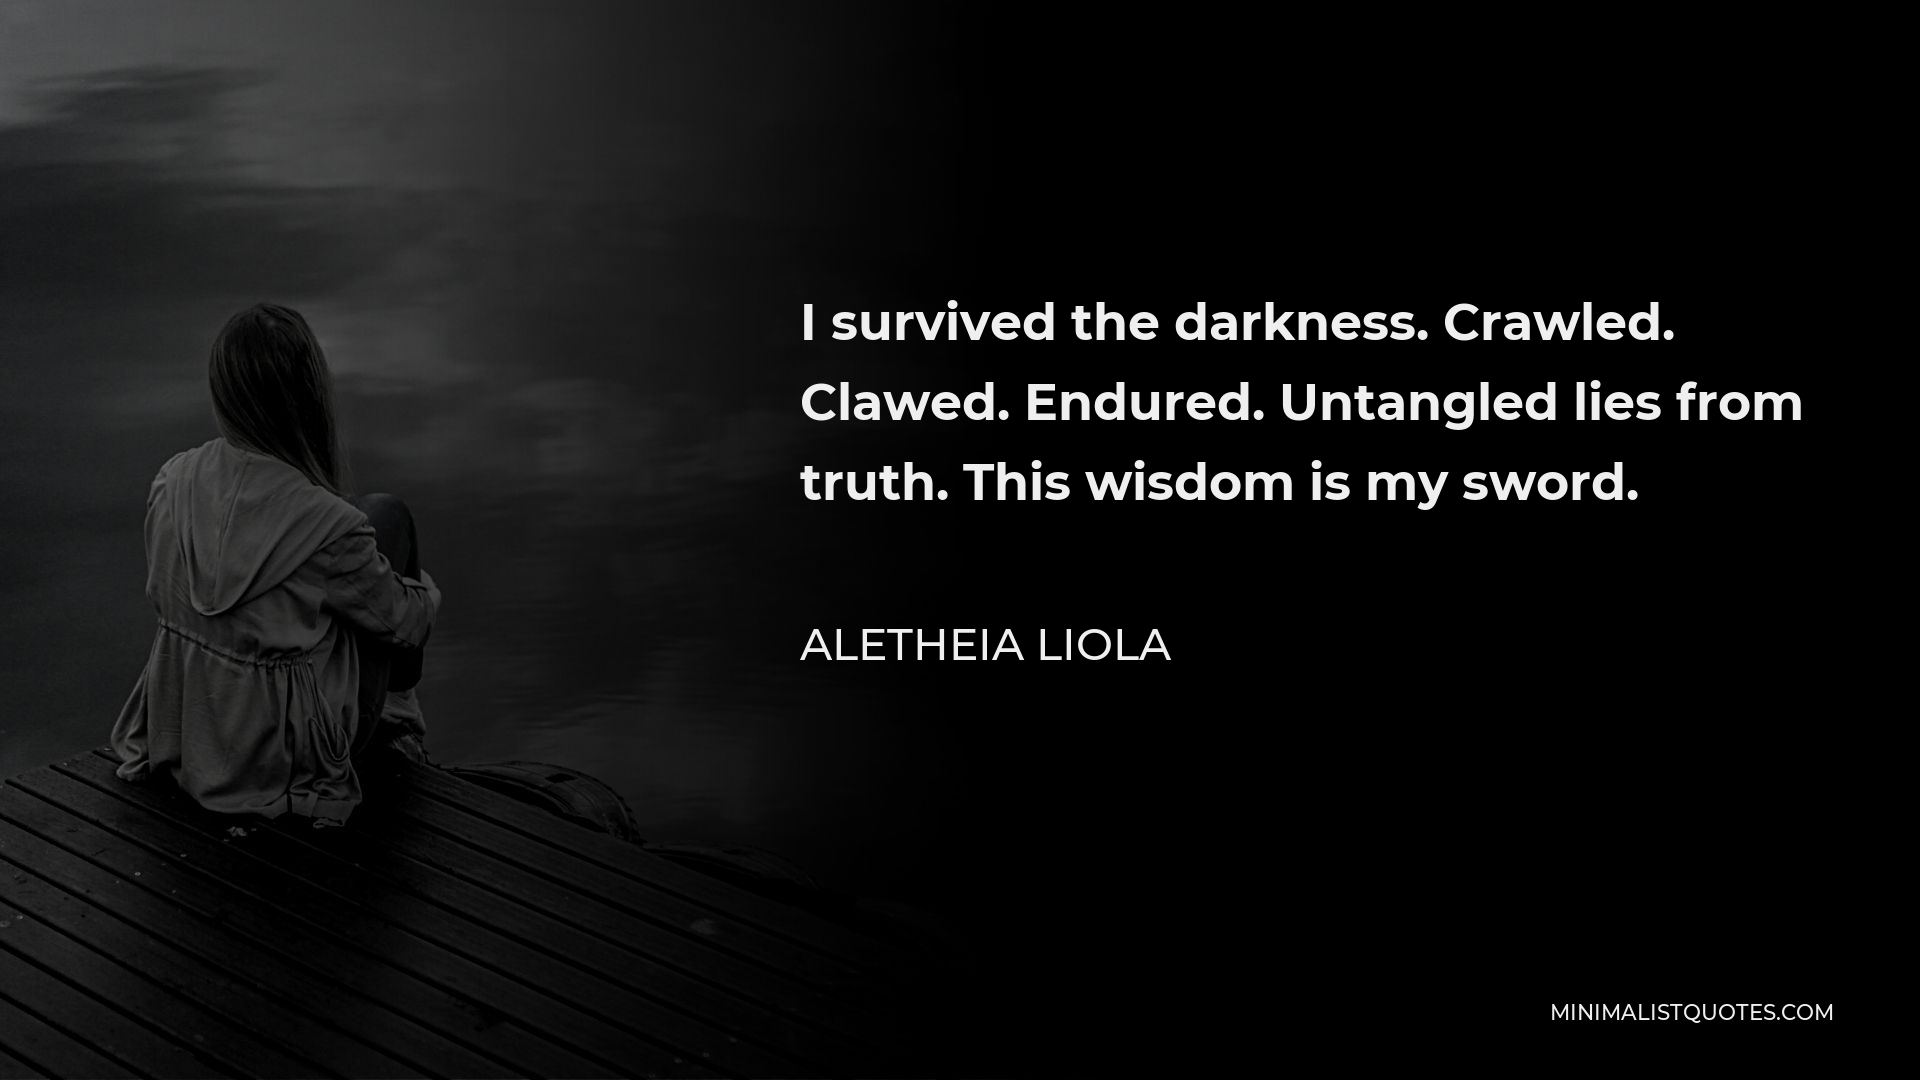 Aletheia Liola Quote - I survived the darkness. Crawled. Clawed. Endured. Untangled lies from truth. This wisdom is my sword.